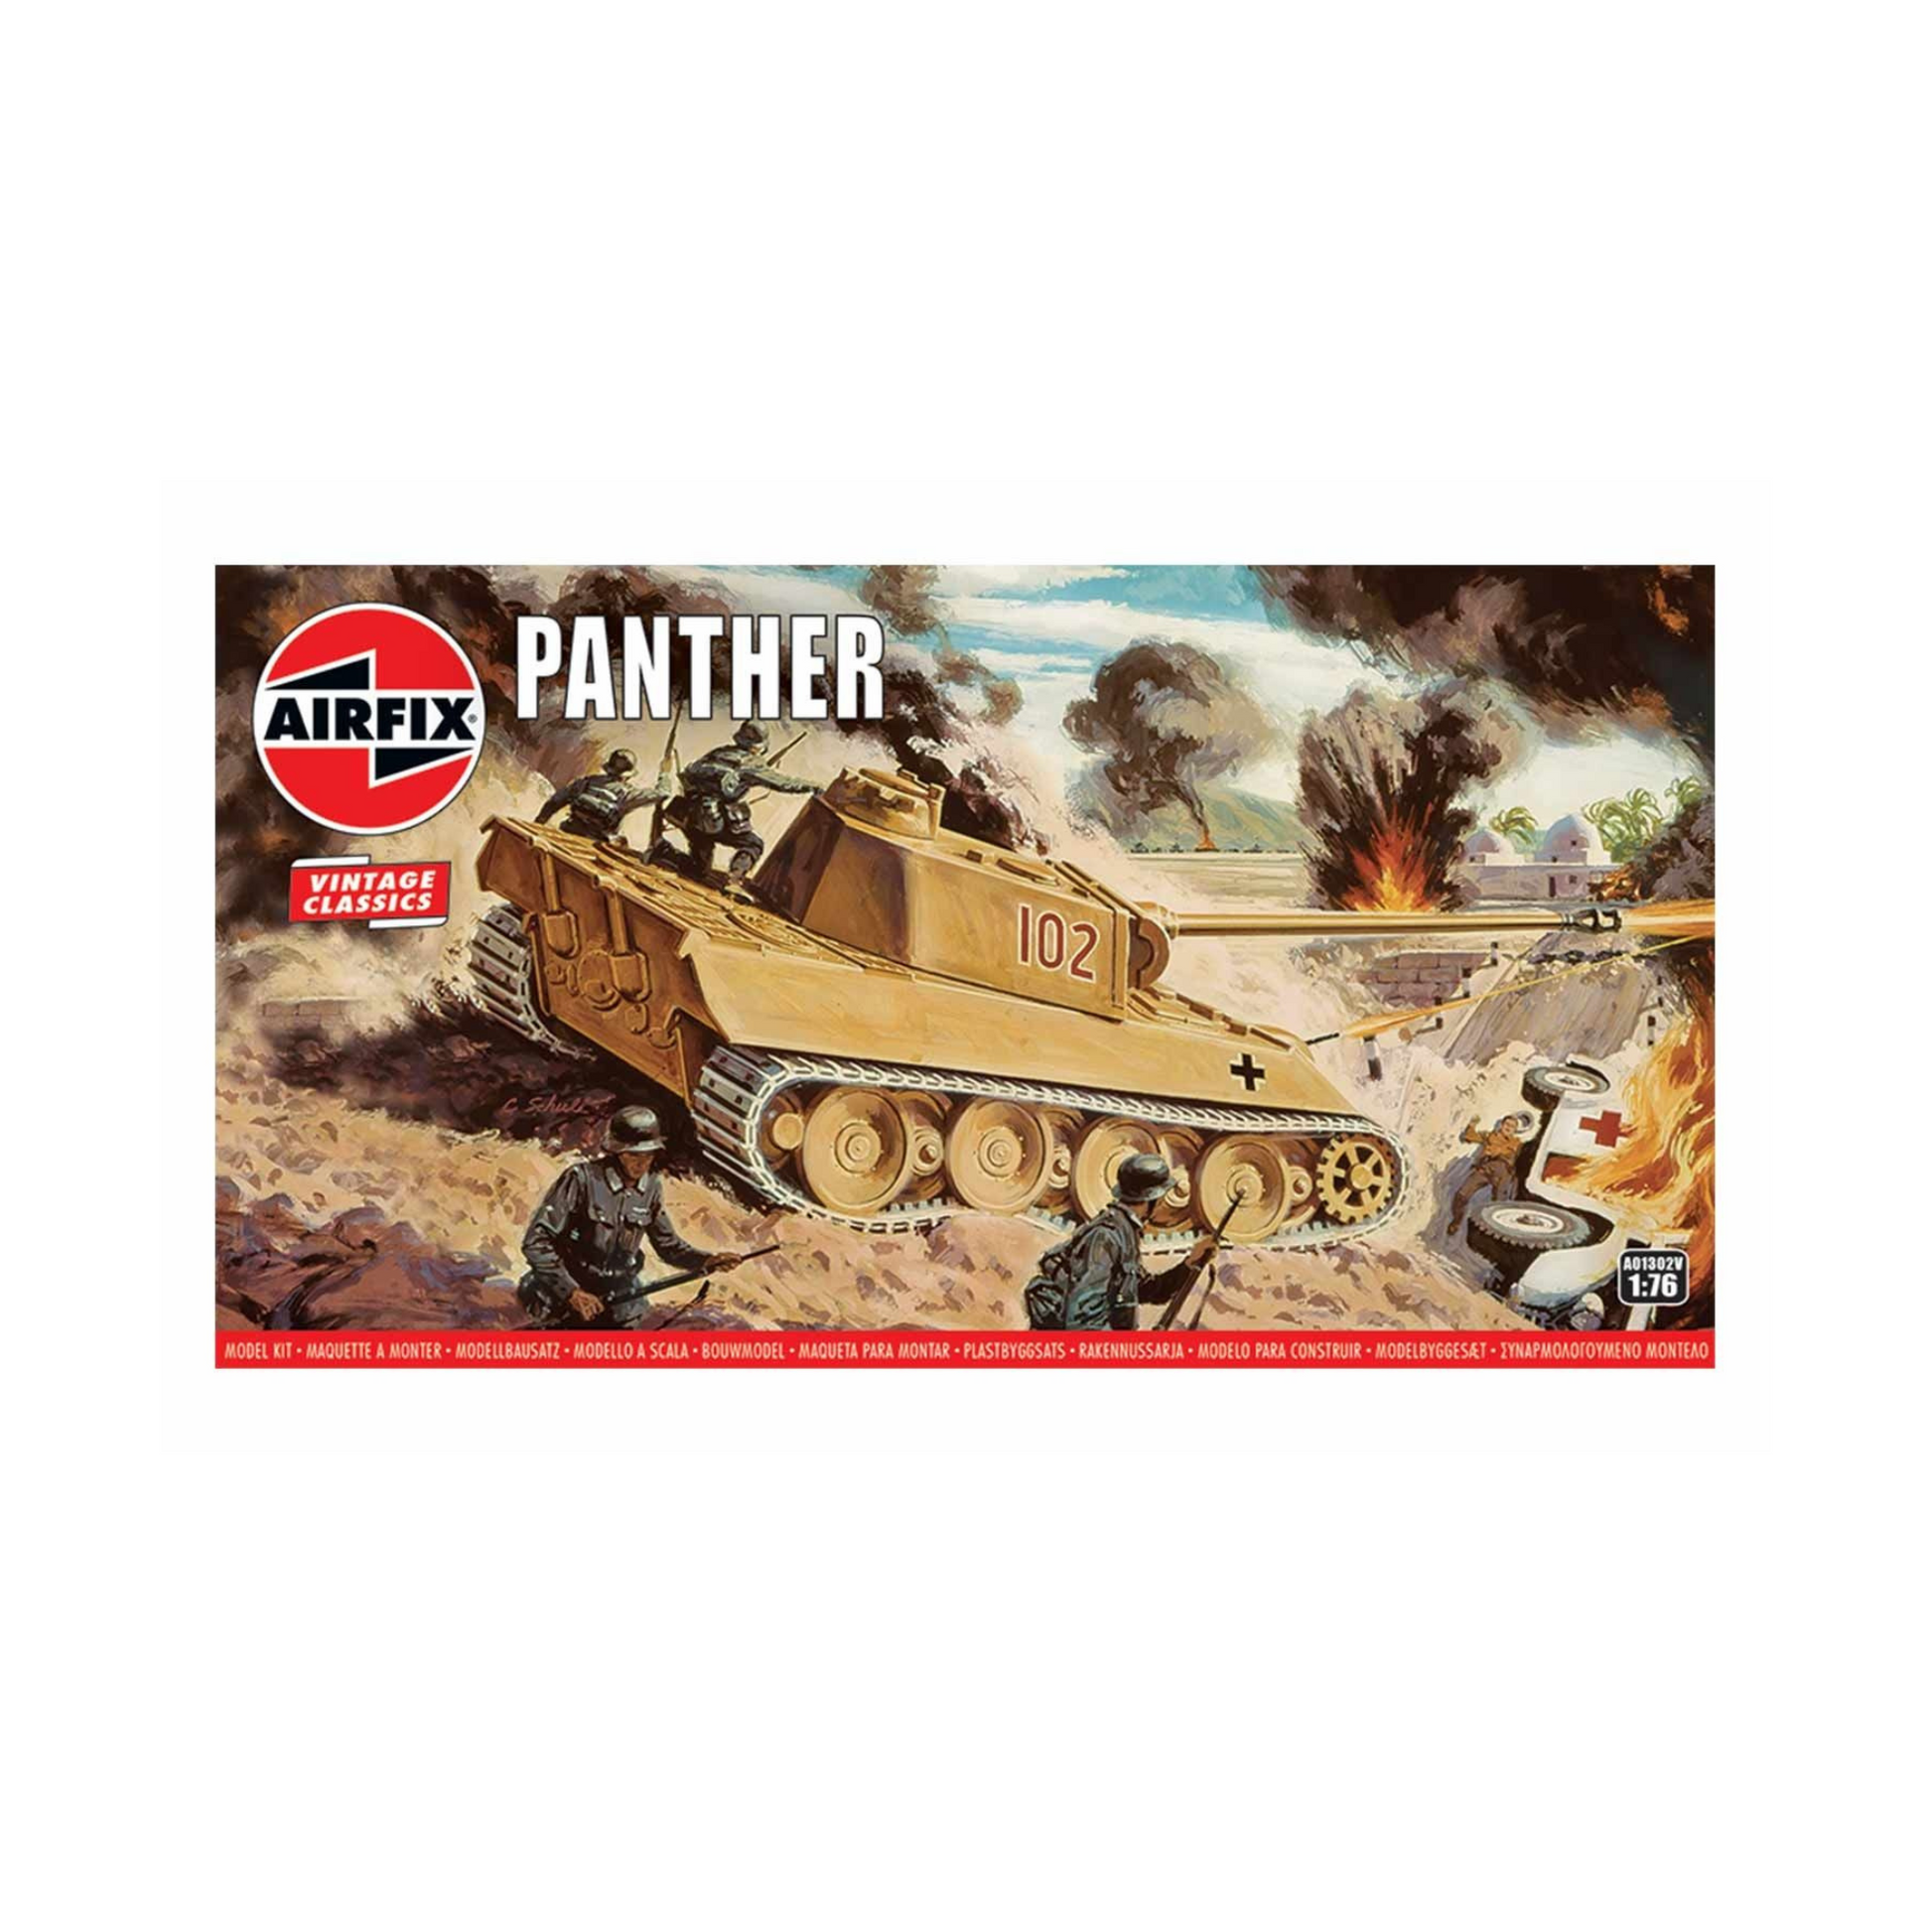 Airfix Vintage Classics Panther tank military vehicle 1:76